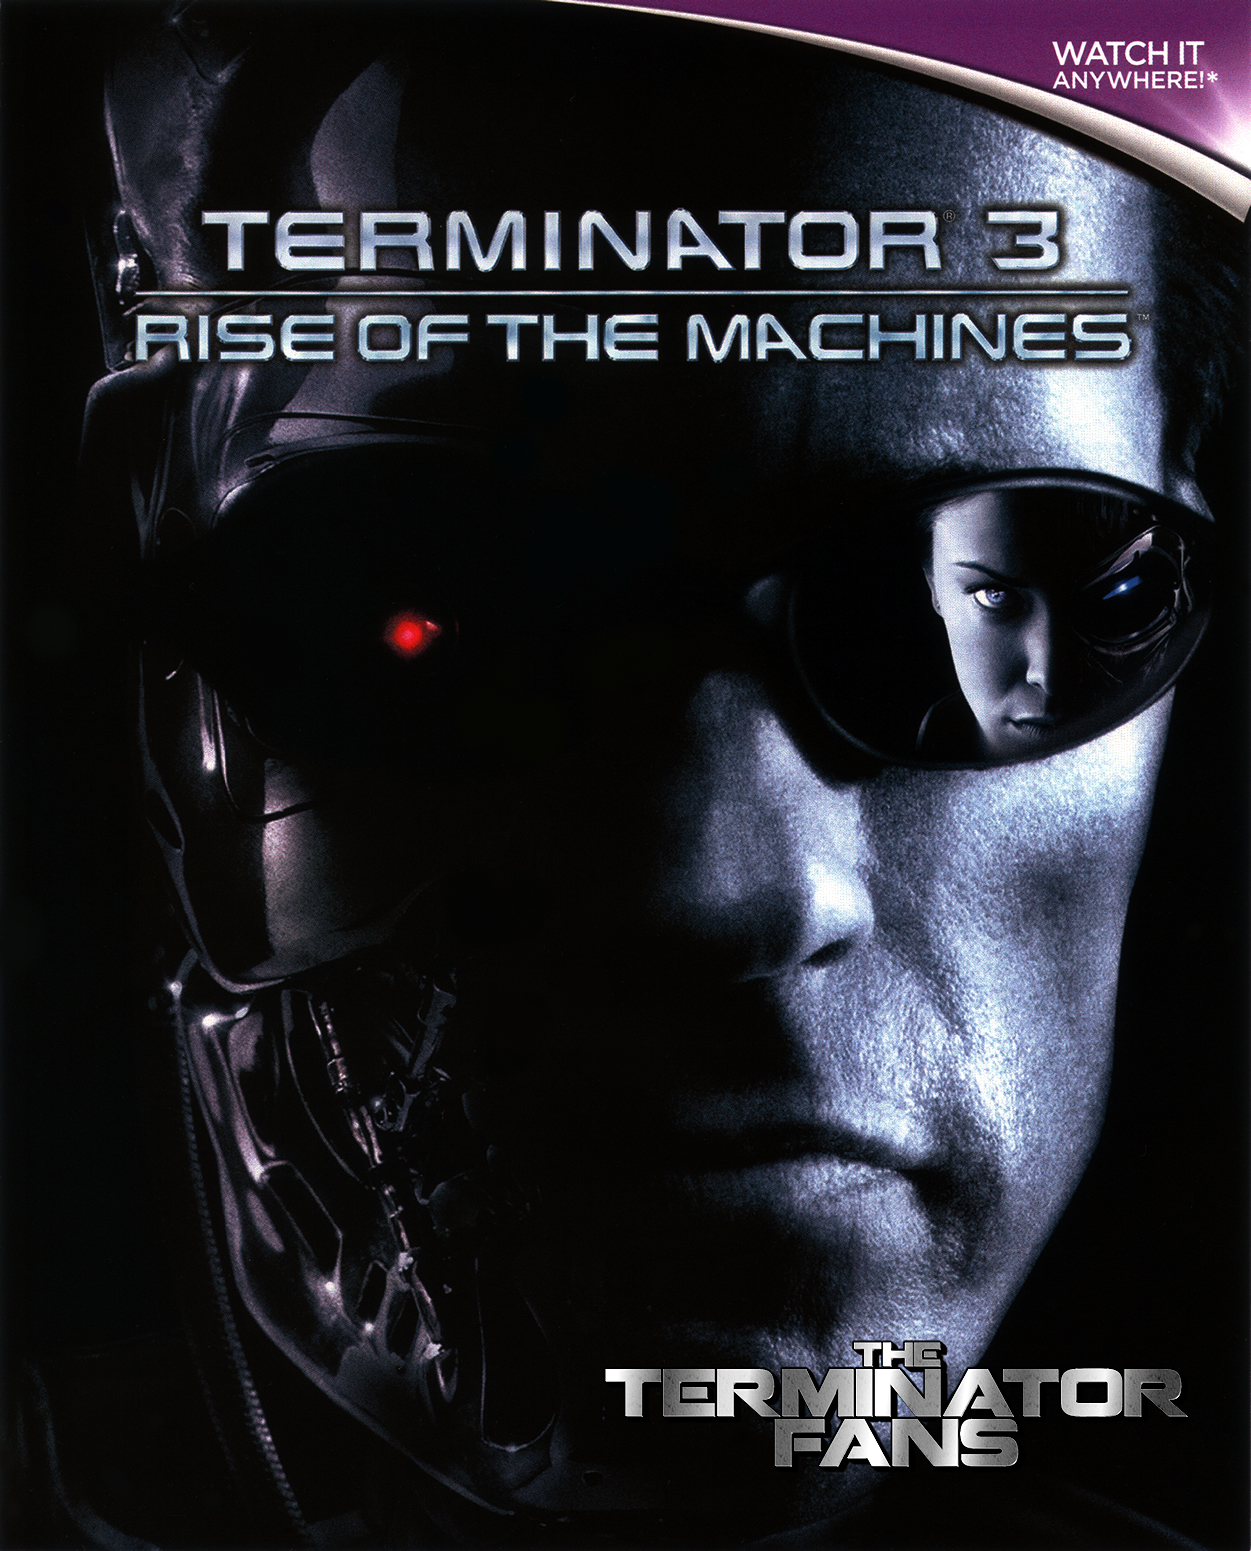 Terminator 3: Rise of the Machines - Zavvi Exclusive Limited